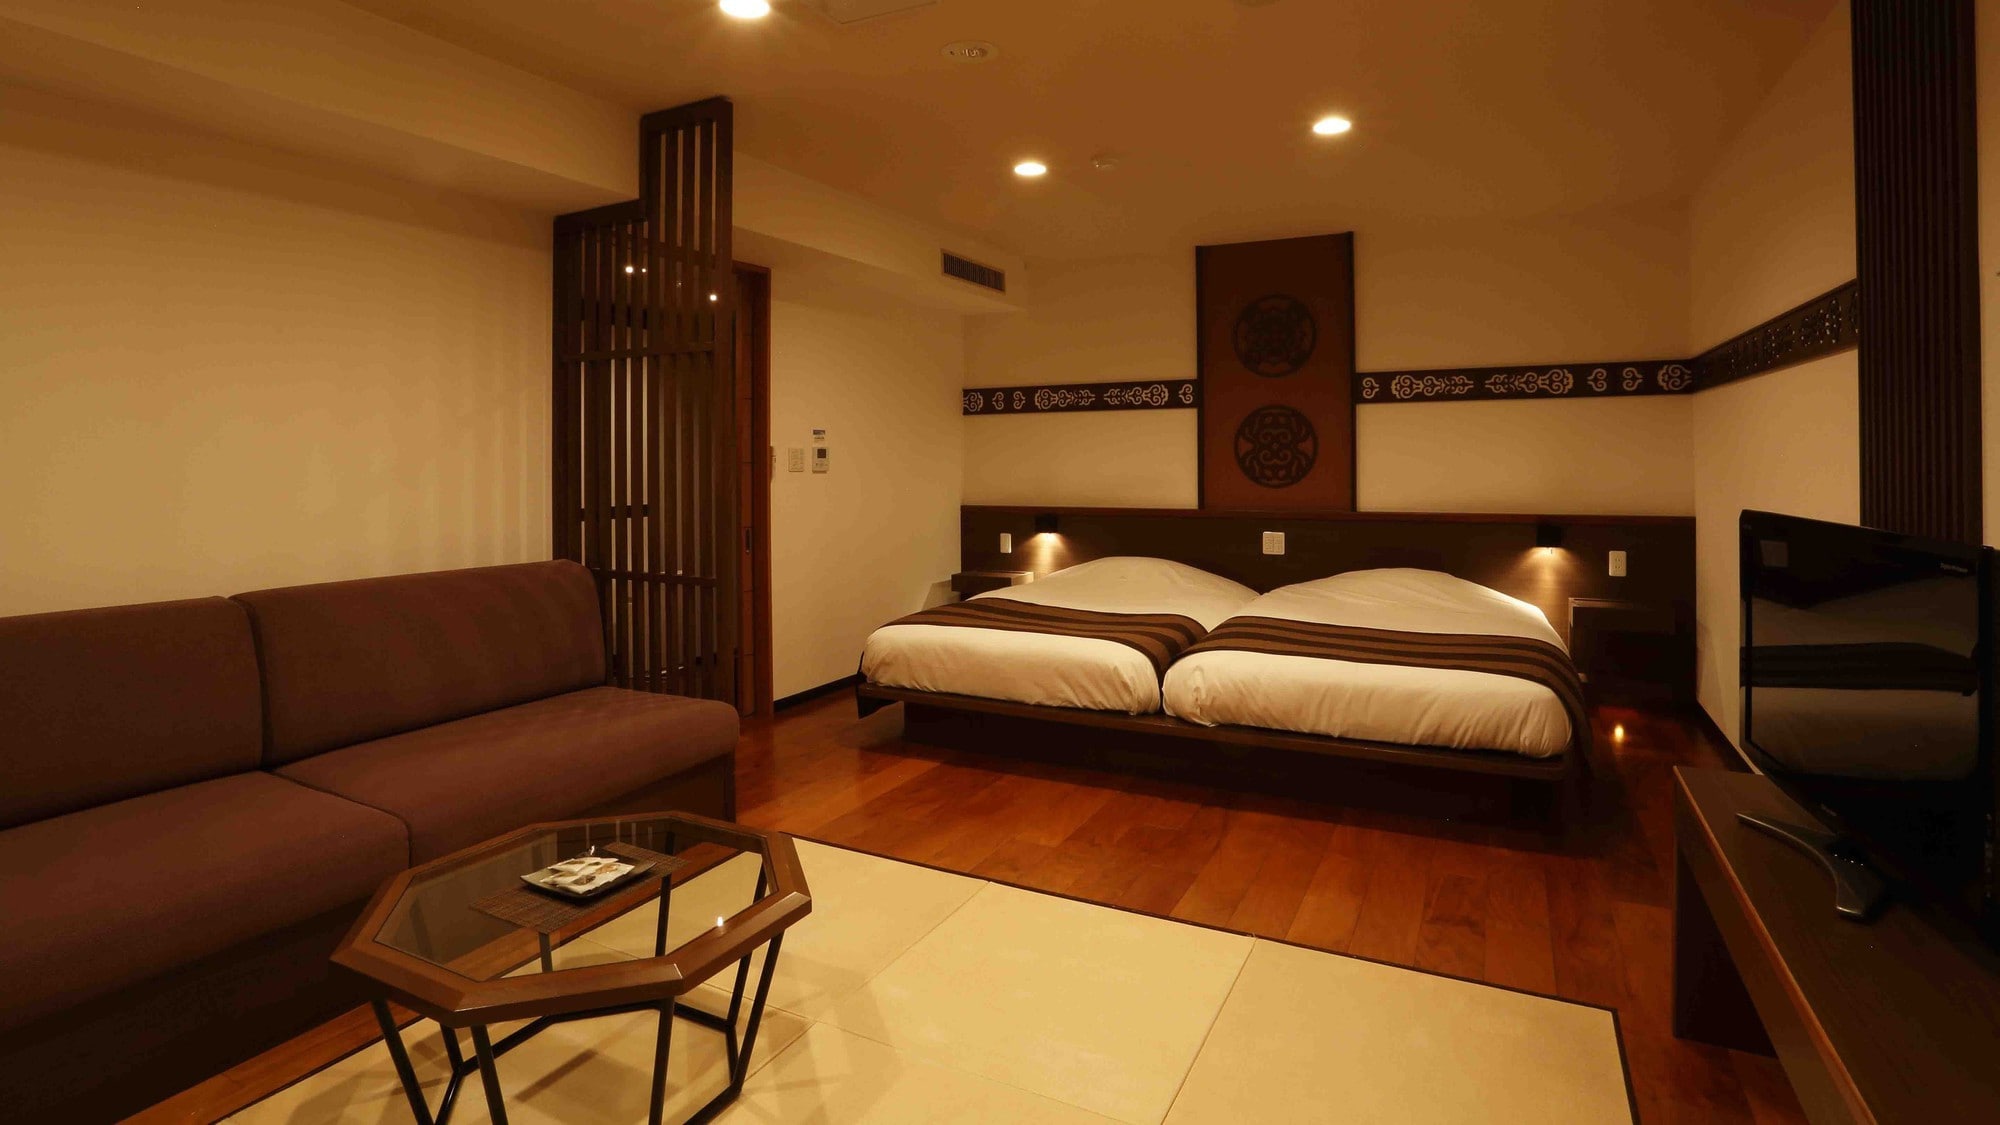 [Tower Building] Japanese-Western style room (example) / Japanese-Western style room consisting of a functional bed and Japanese-style room space